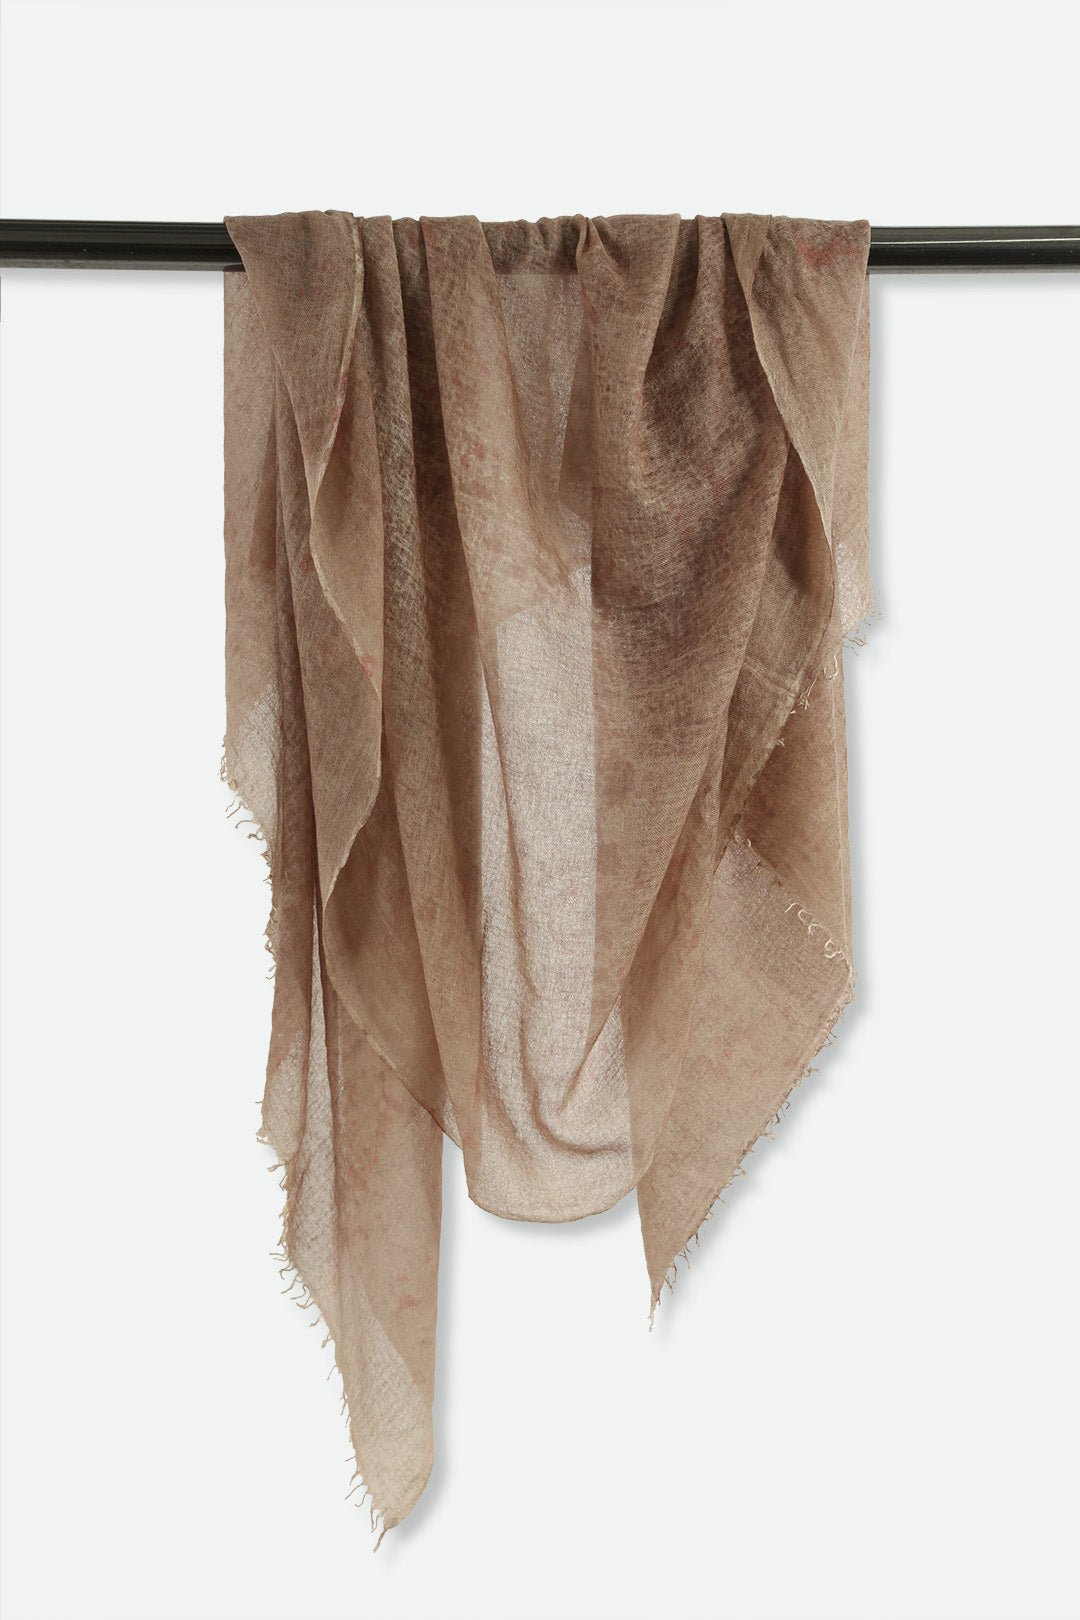 DESERT SAND SCARF IN HAND DYED CASHMERE - Jarbo